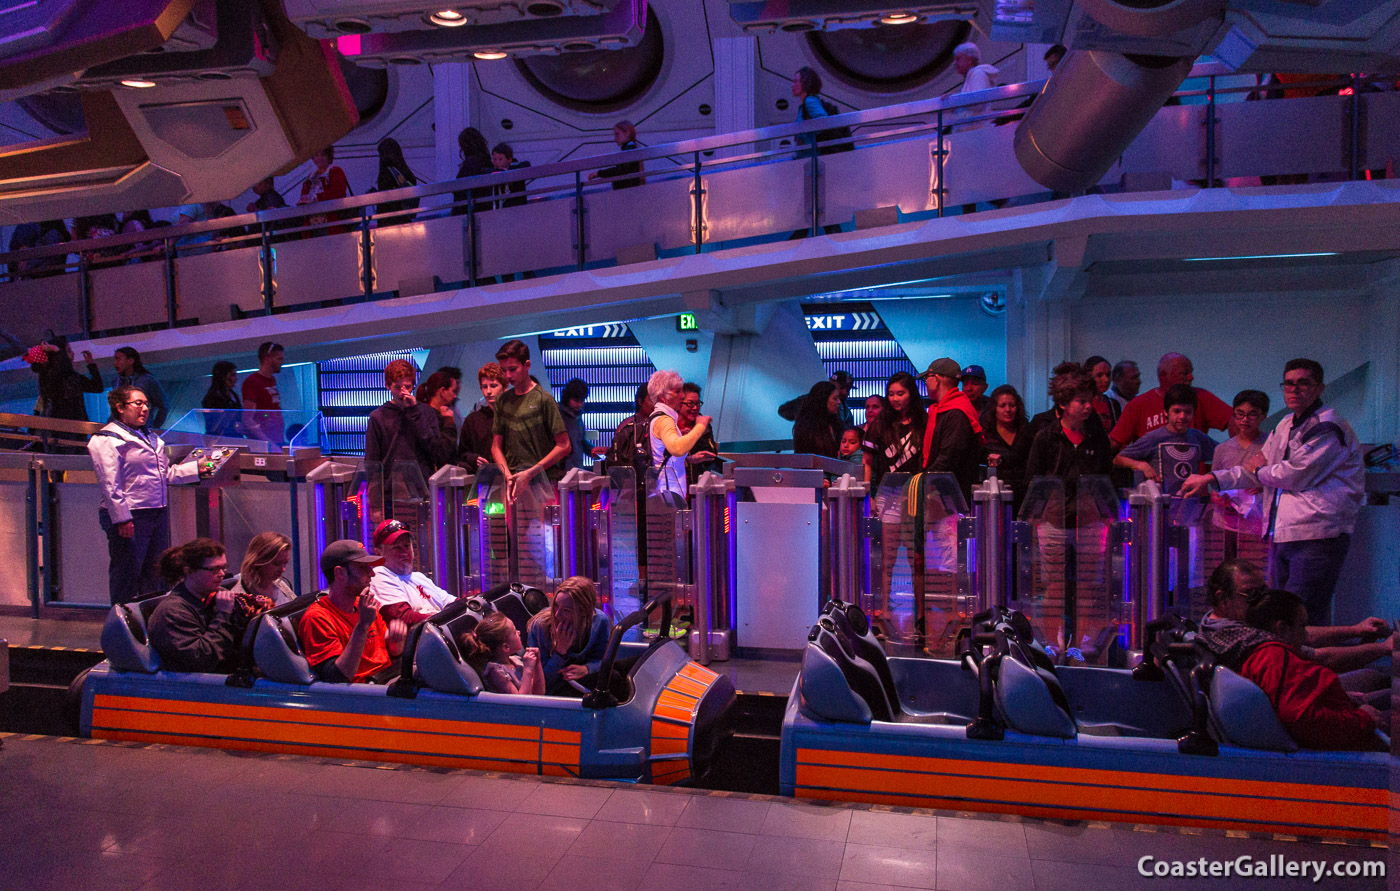 Pictures of the trains on the Space Mountain coaster at Disneyland